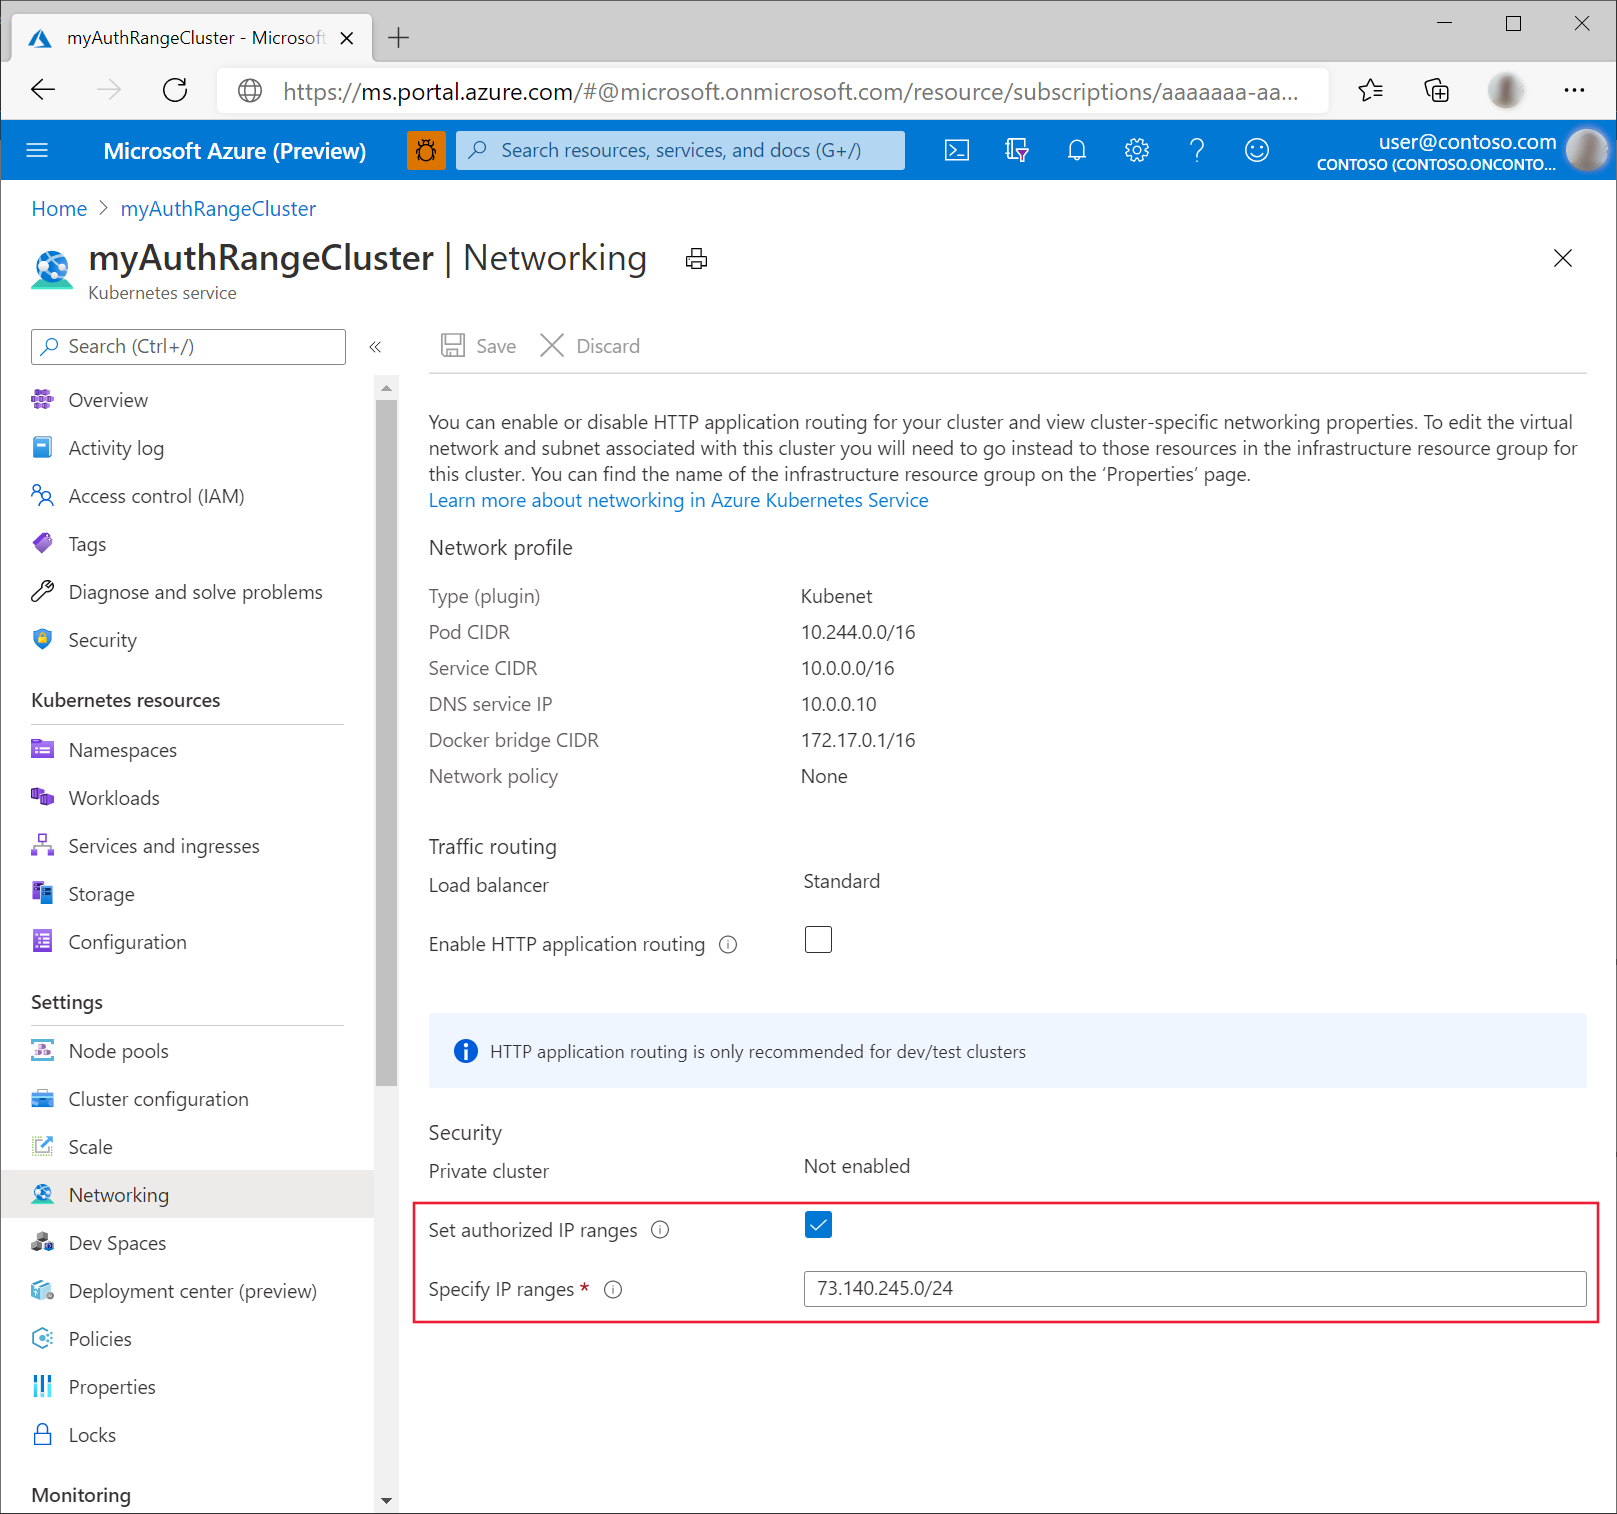 In a browser, shows the cluster resource's networking settings Azure portal page. The options 'set specified IP range' and 'Specified IP ranges' are highlighted.